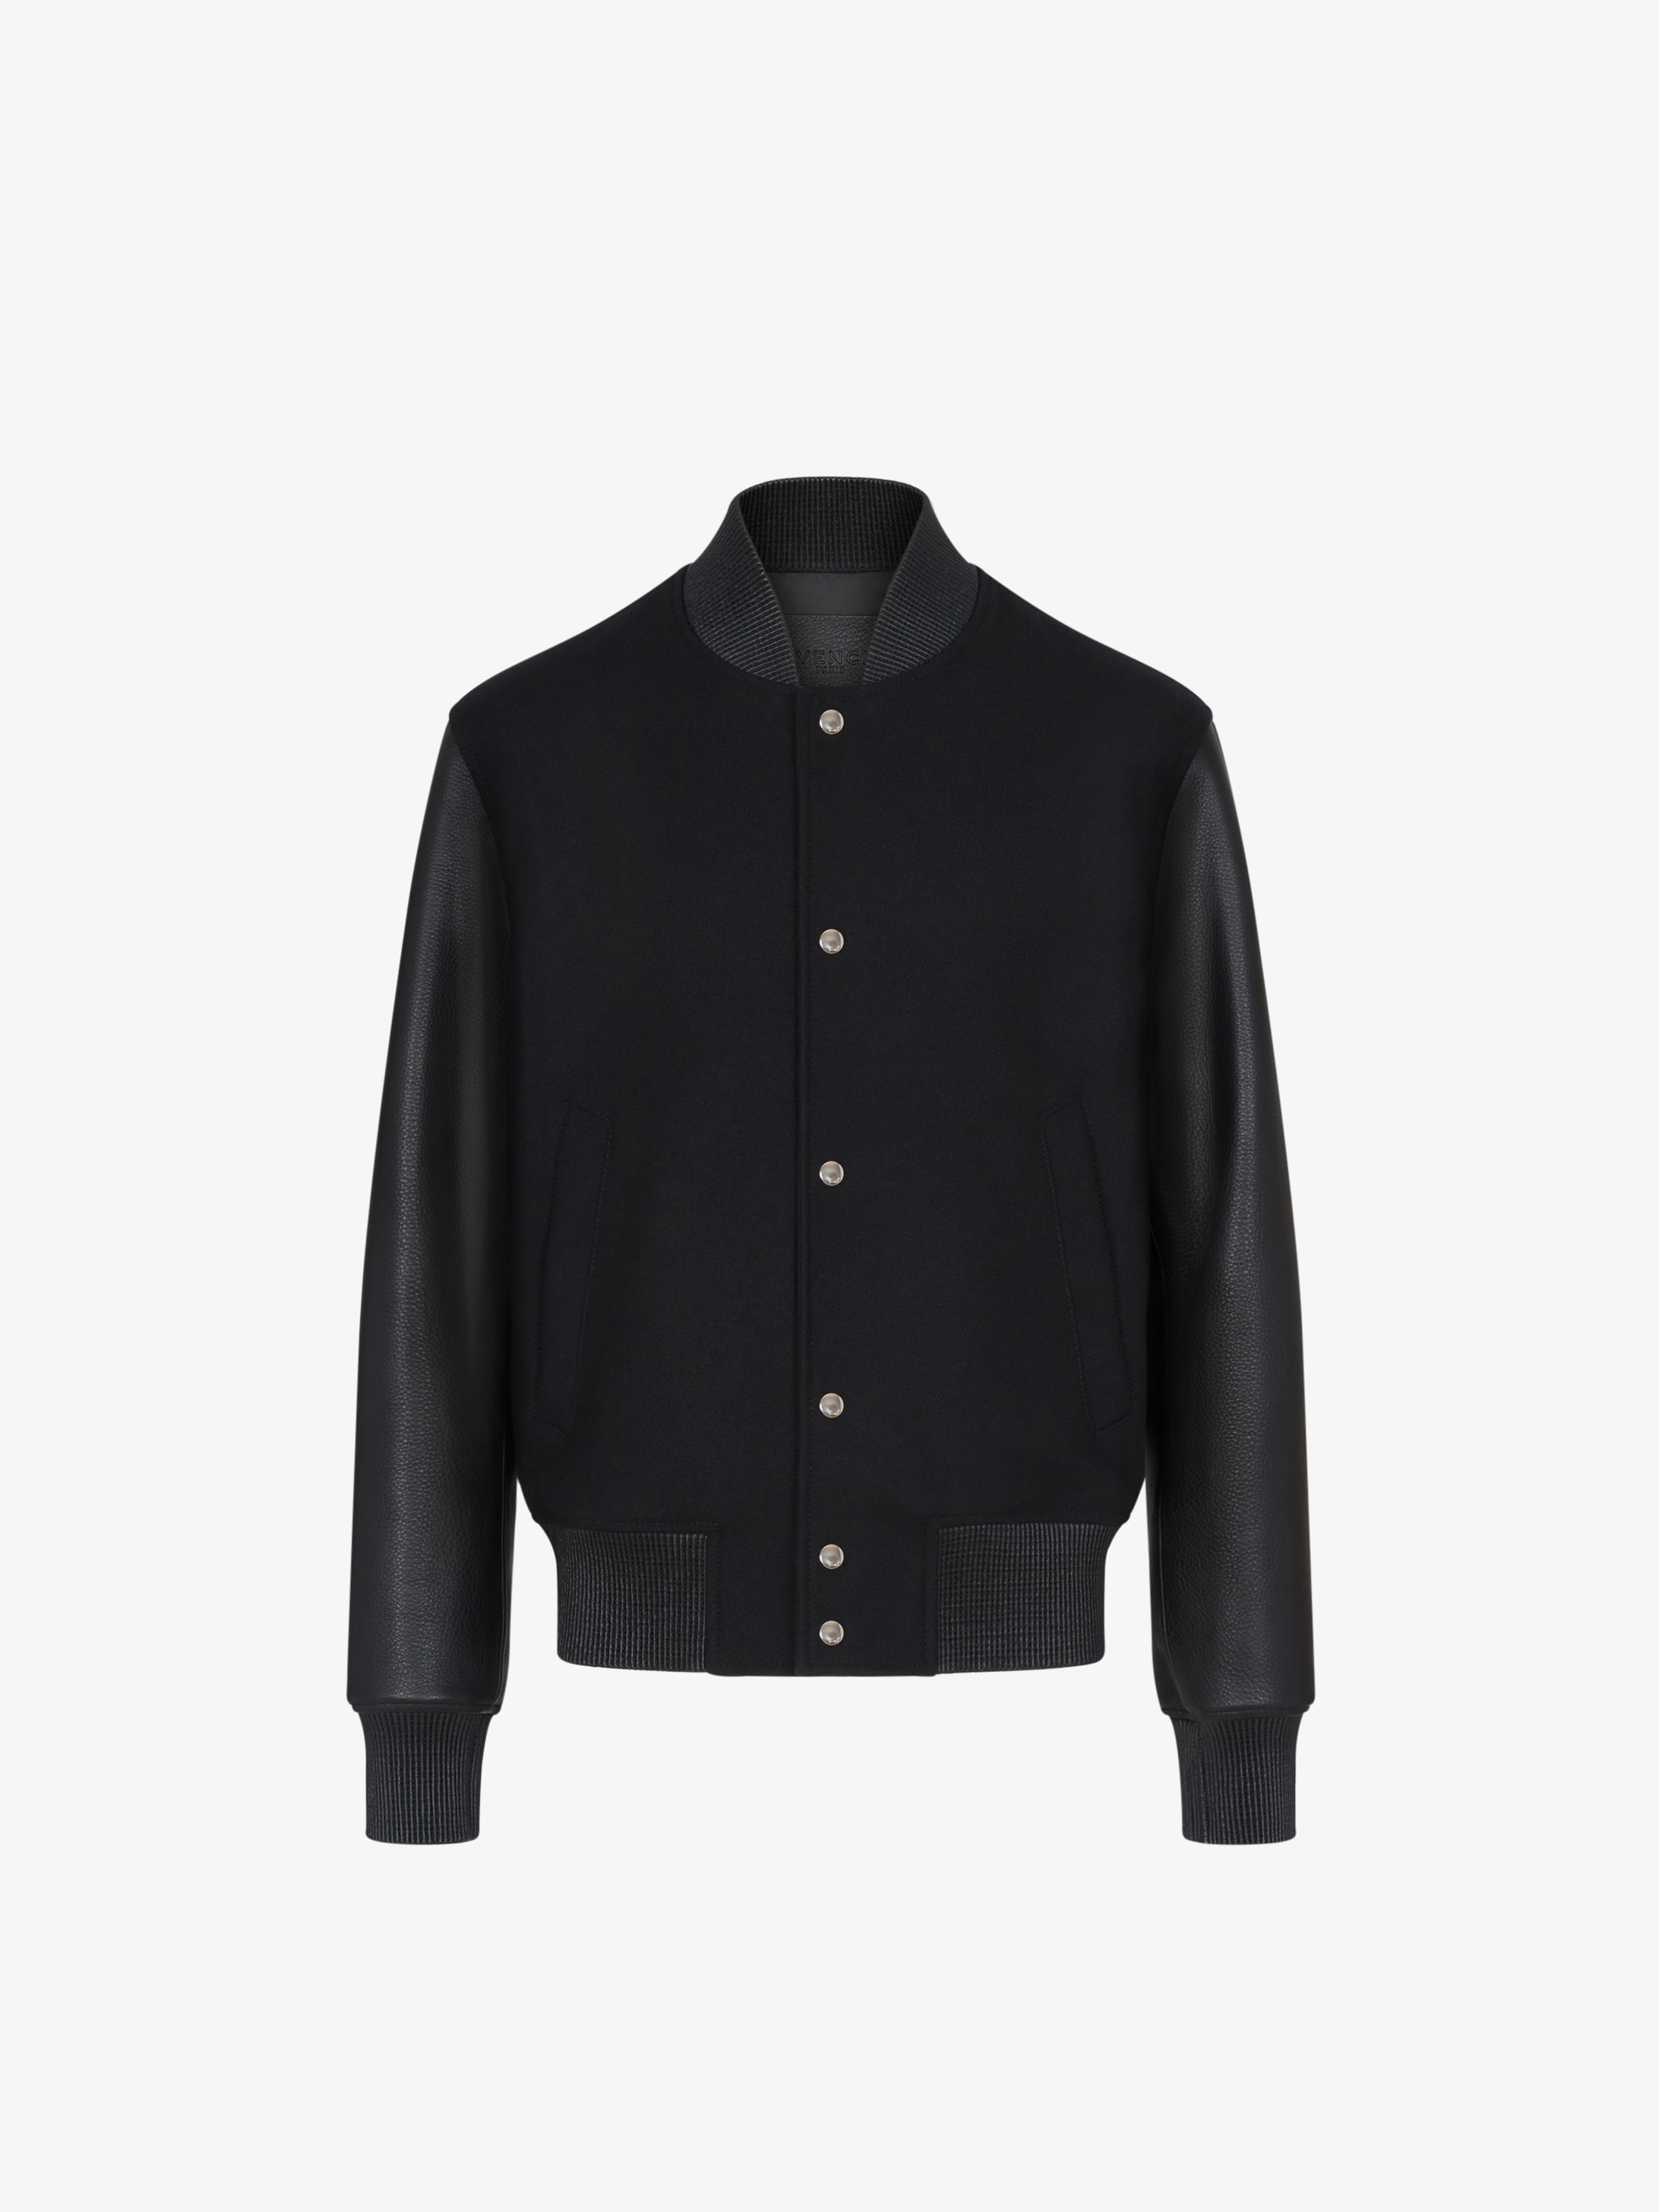 GIVENCHY Bull bomber jacket in wool and leather | GIVENCHY Paris